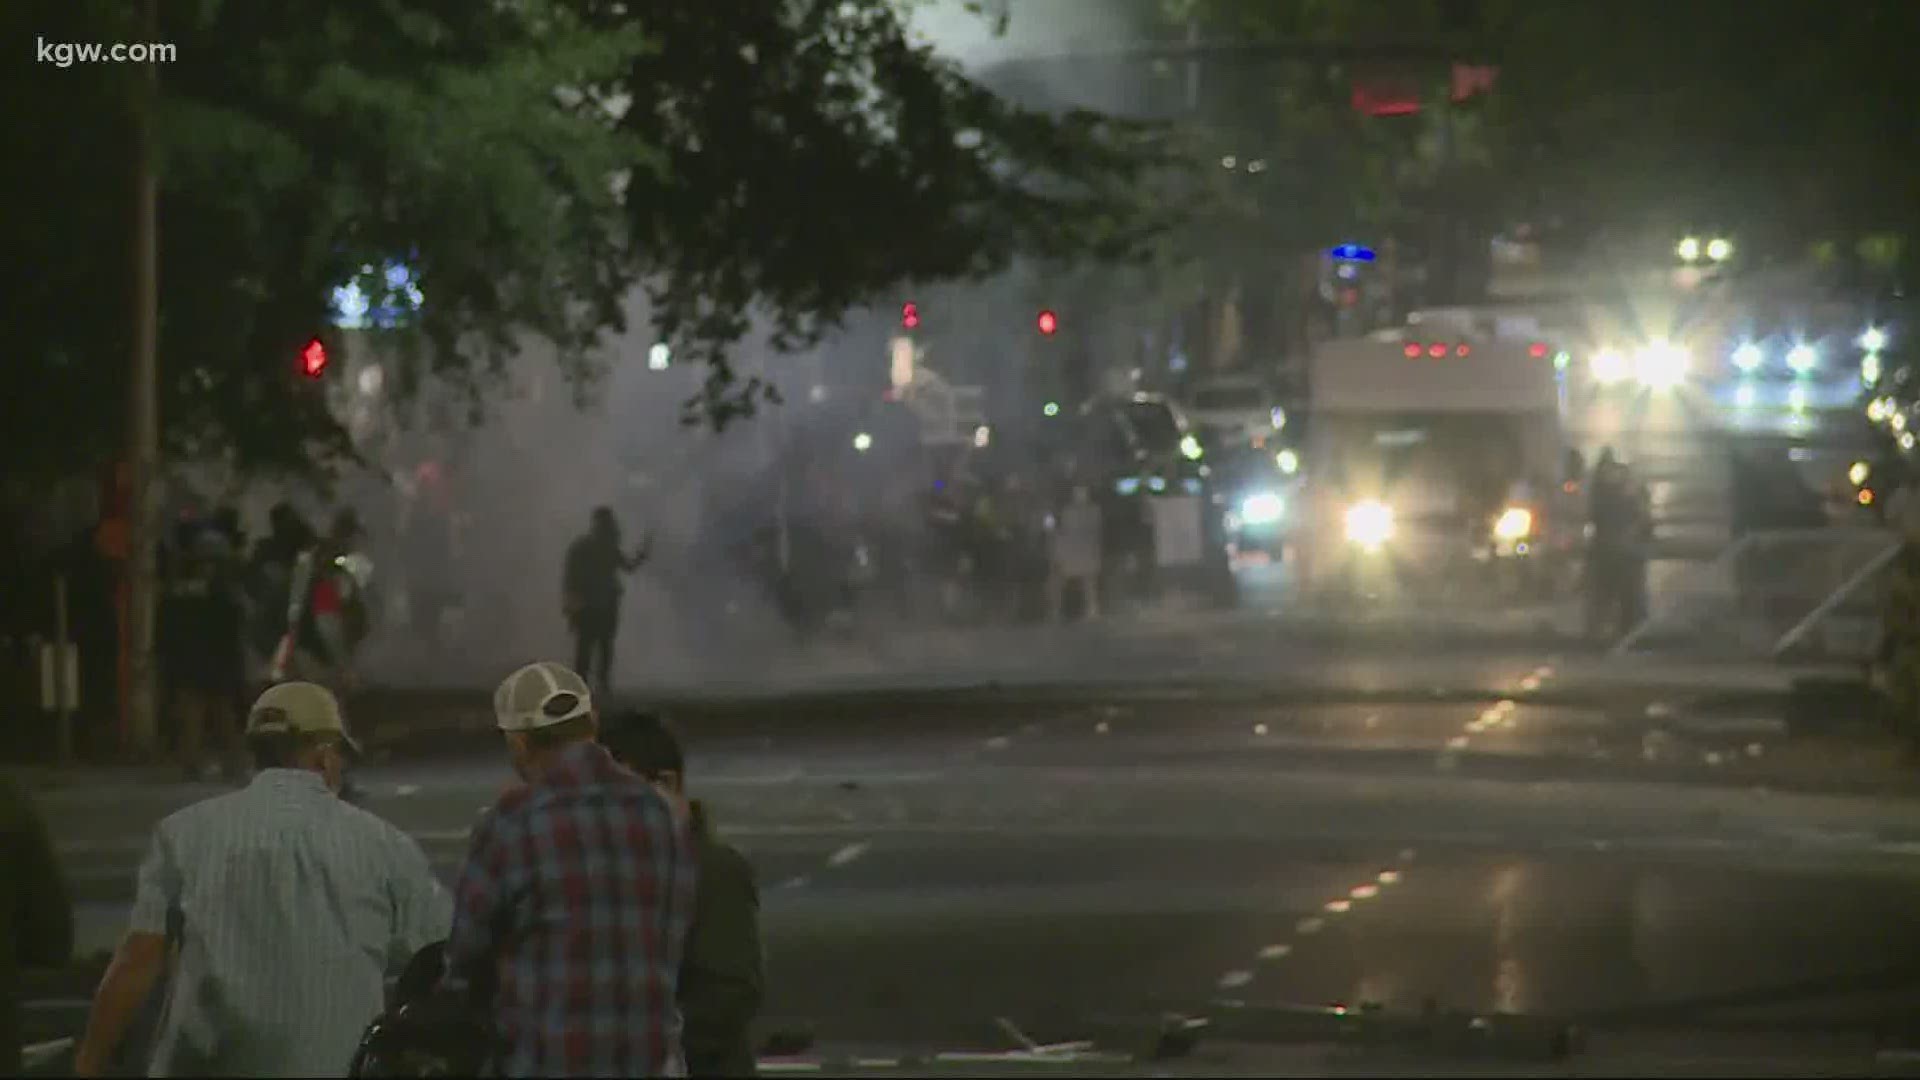 Protests in Portland continue as federal officers remain in the city, despite calls from local and national leaders for them to leave.